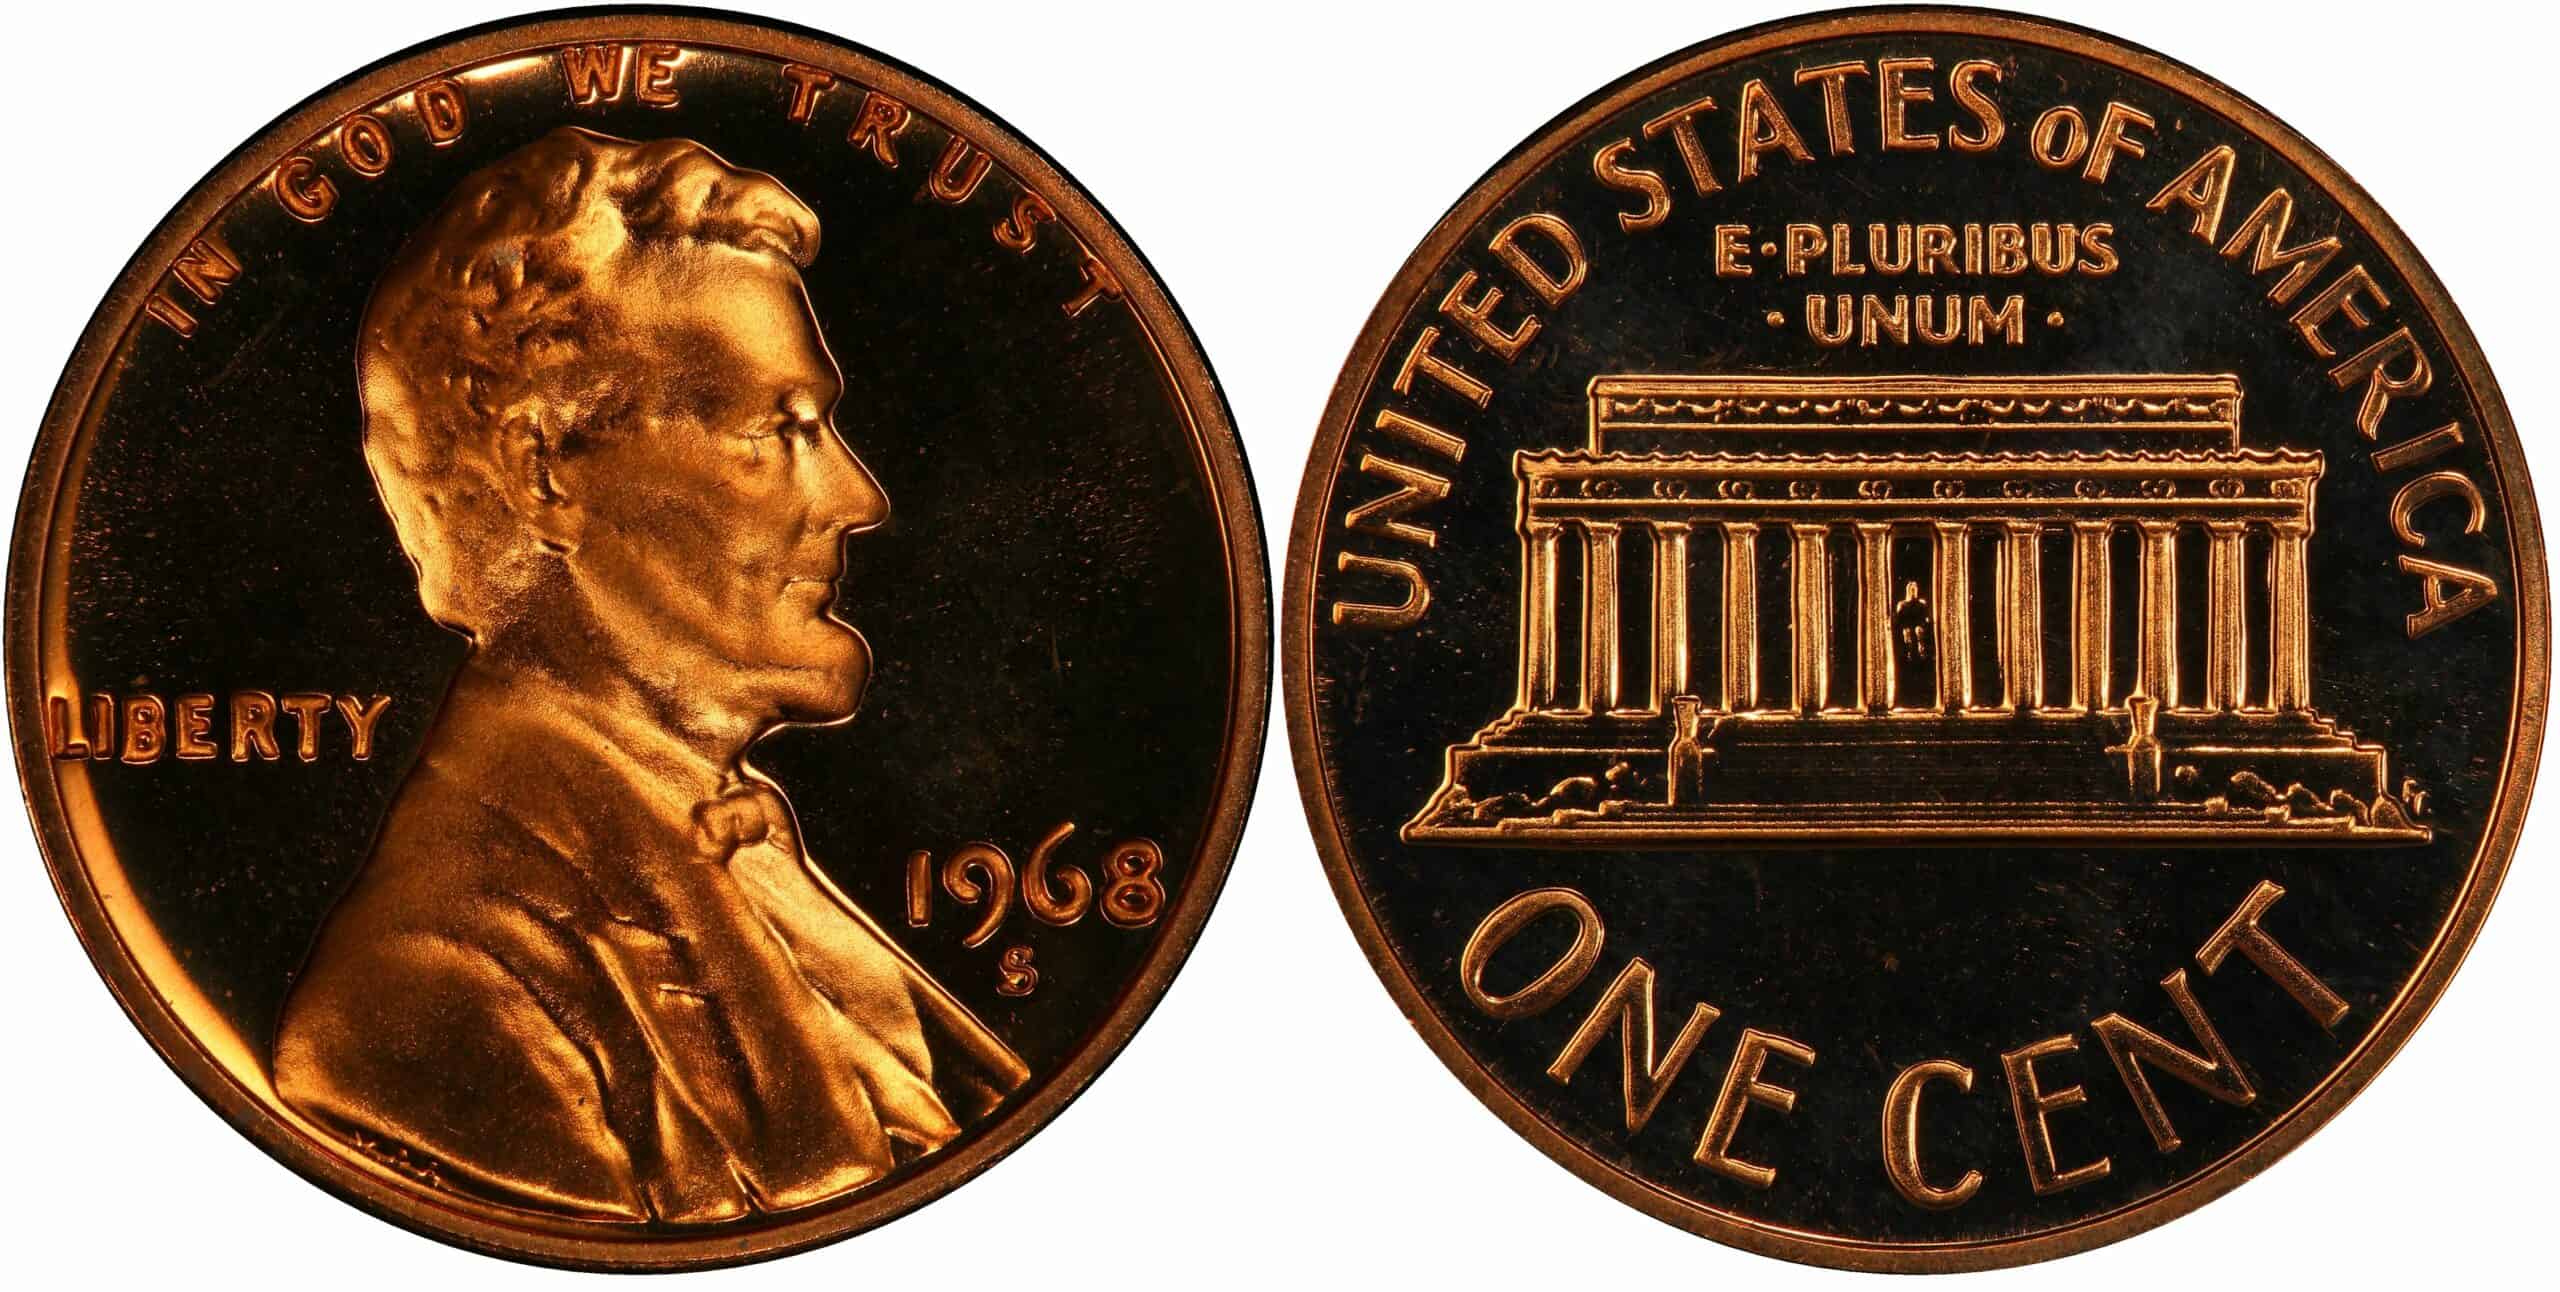 The 1968 “S” Proof Penny